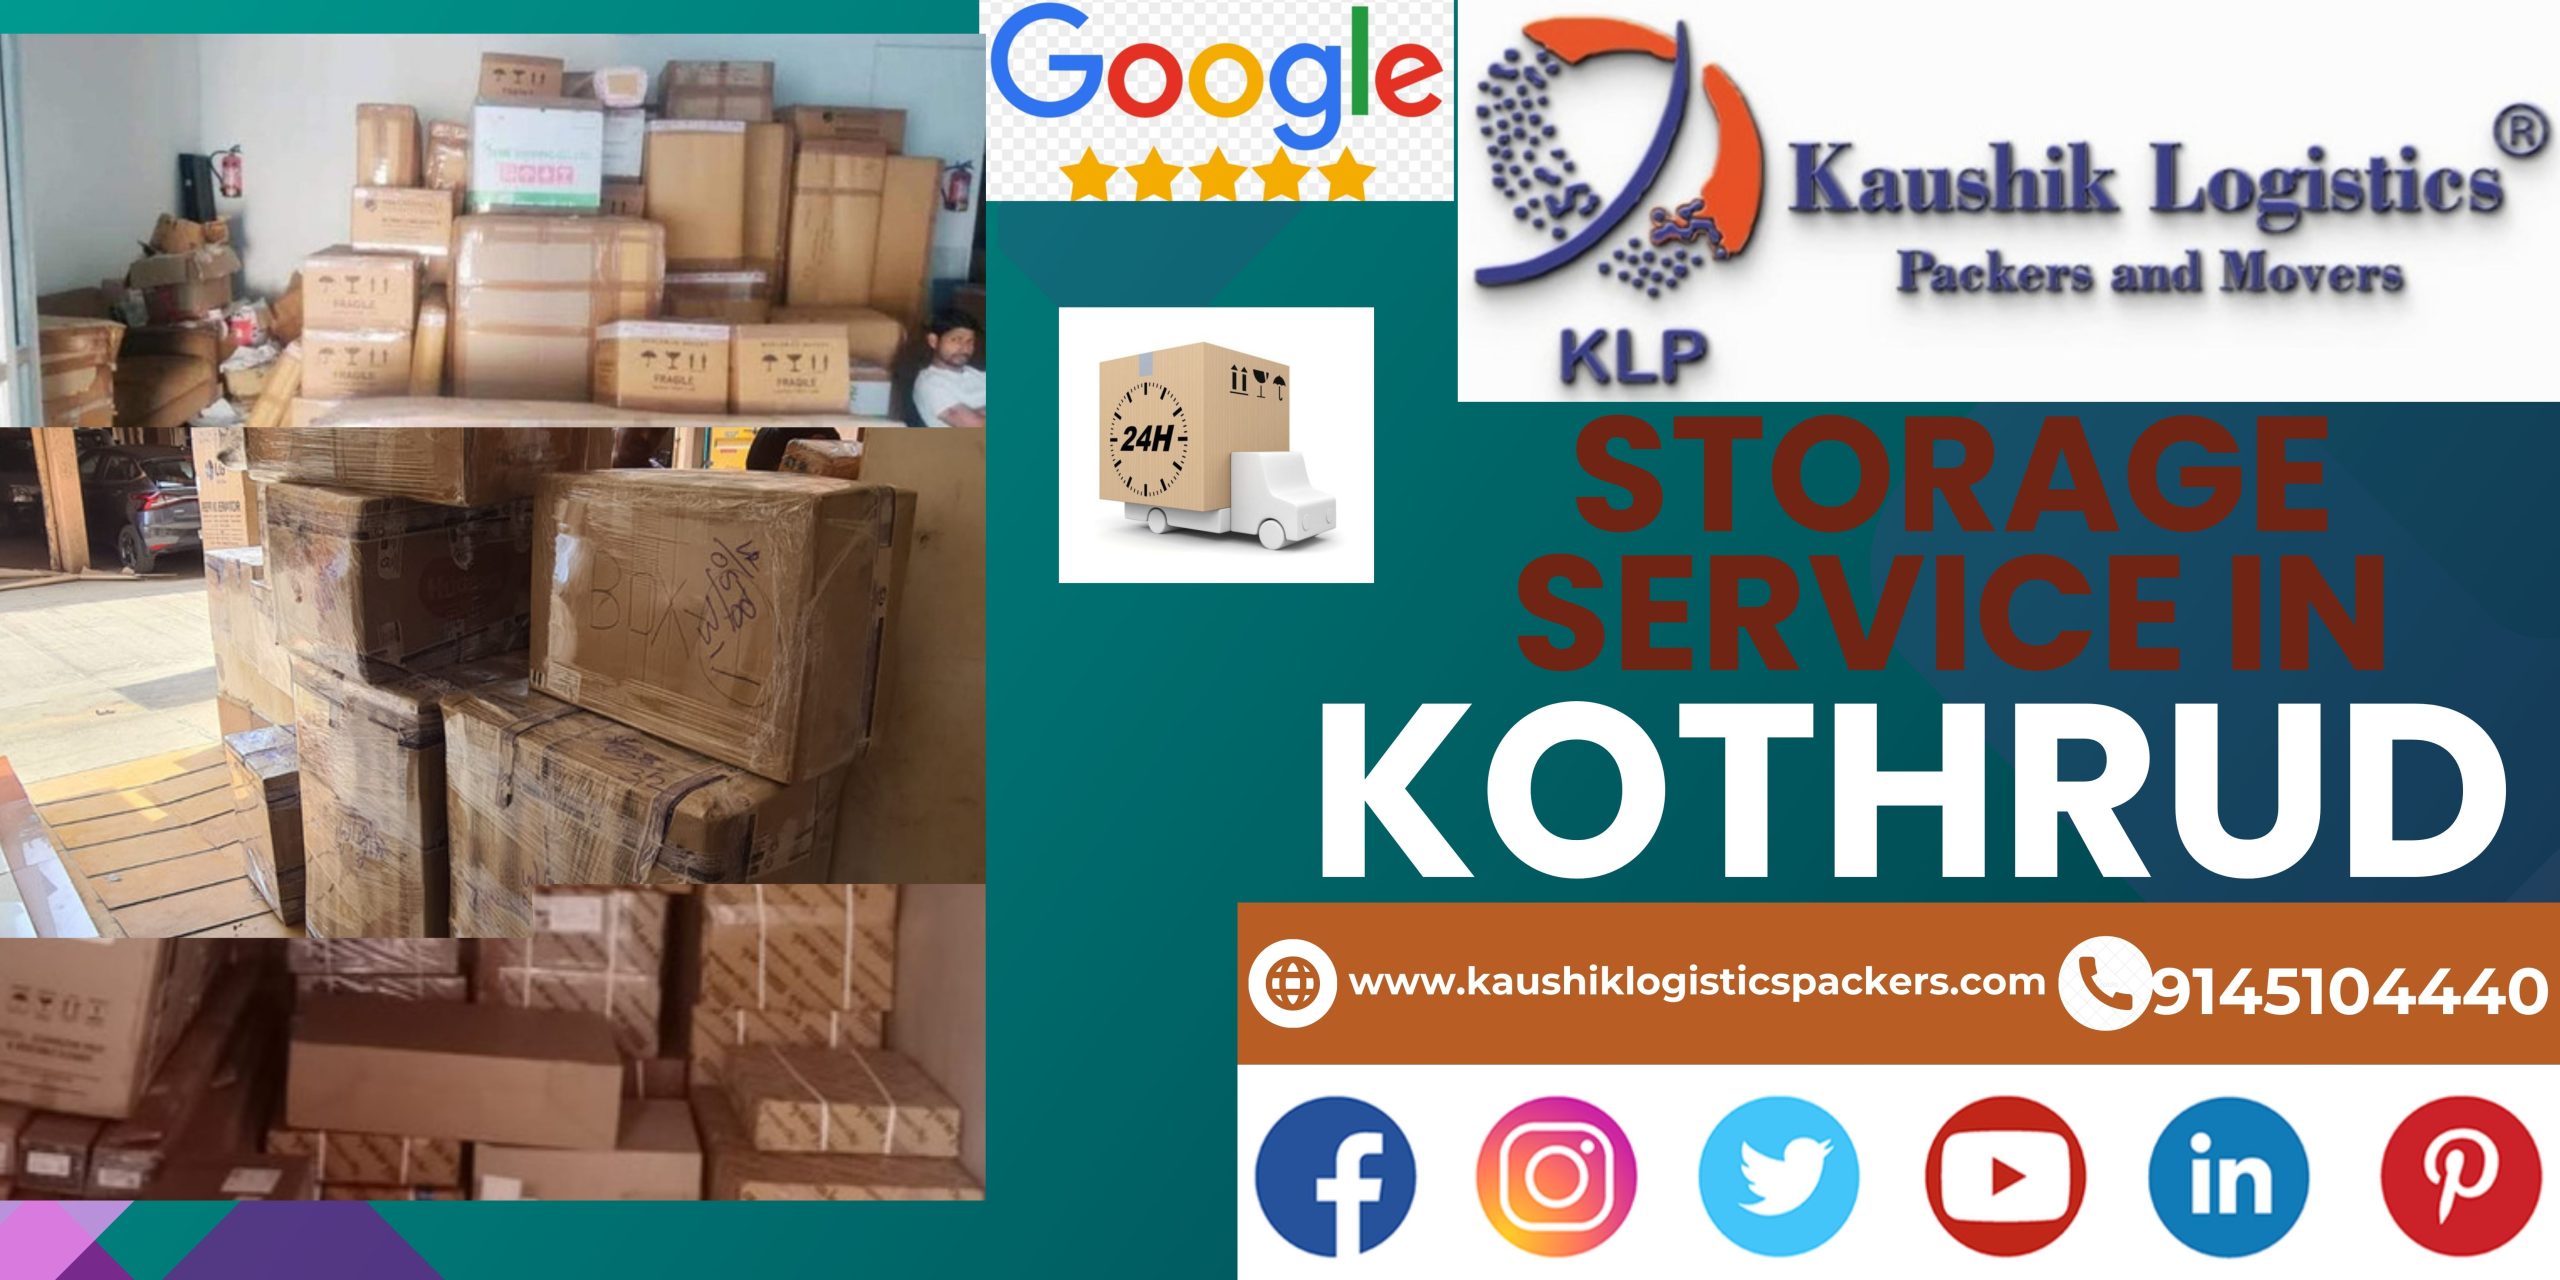 Packers and Movers In Kothrud